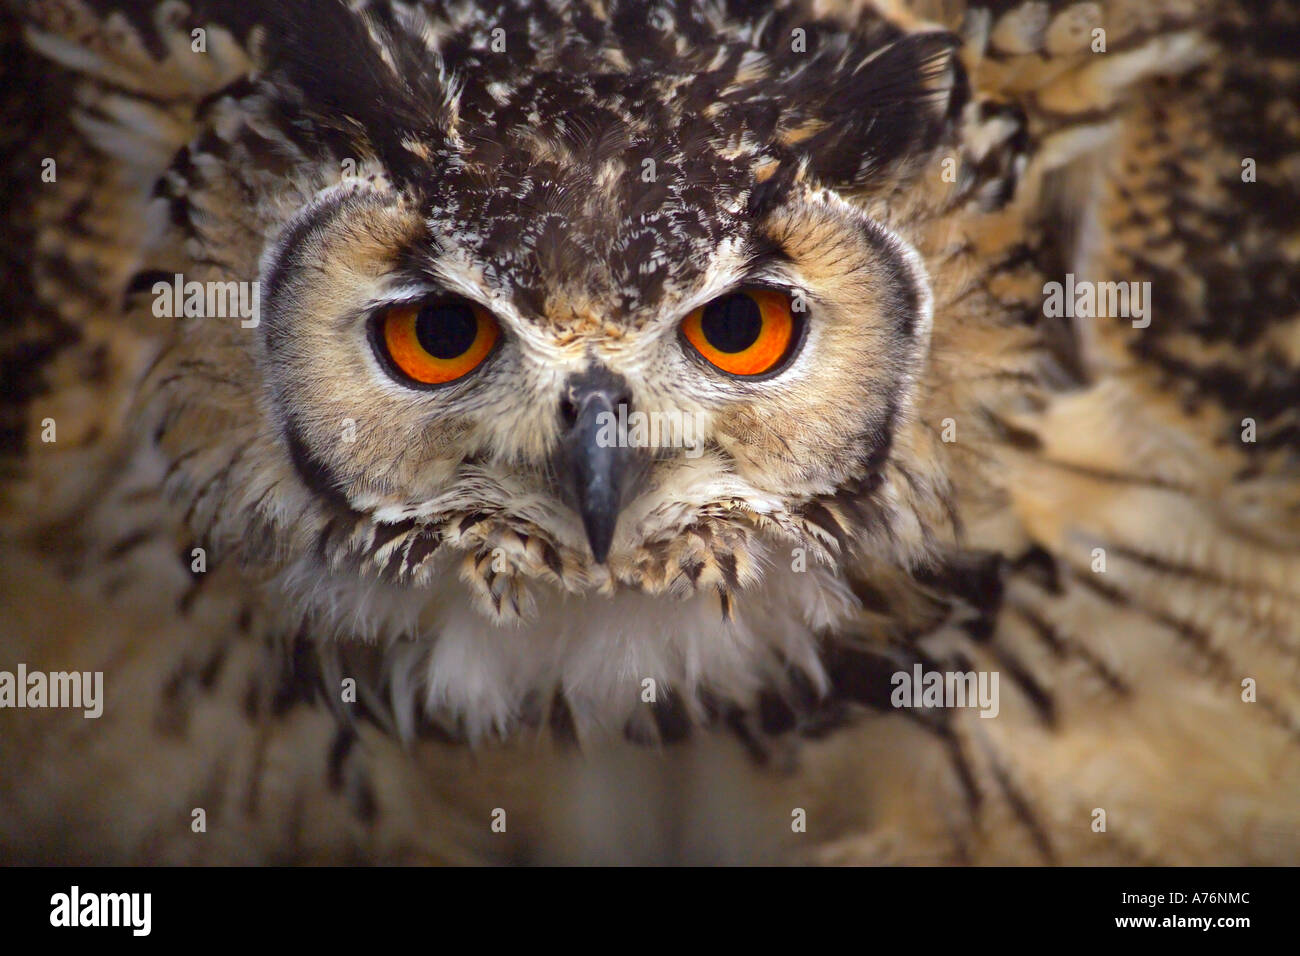 Close up of the angry staring eyes of the Long-eared Owl (Asio otus) in a typical defensive position. Stock Photo